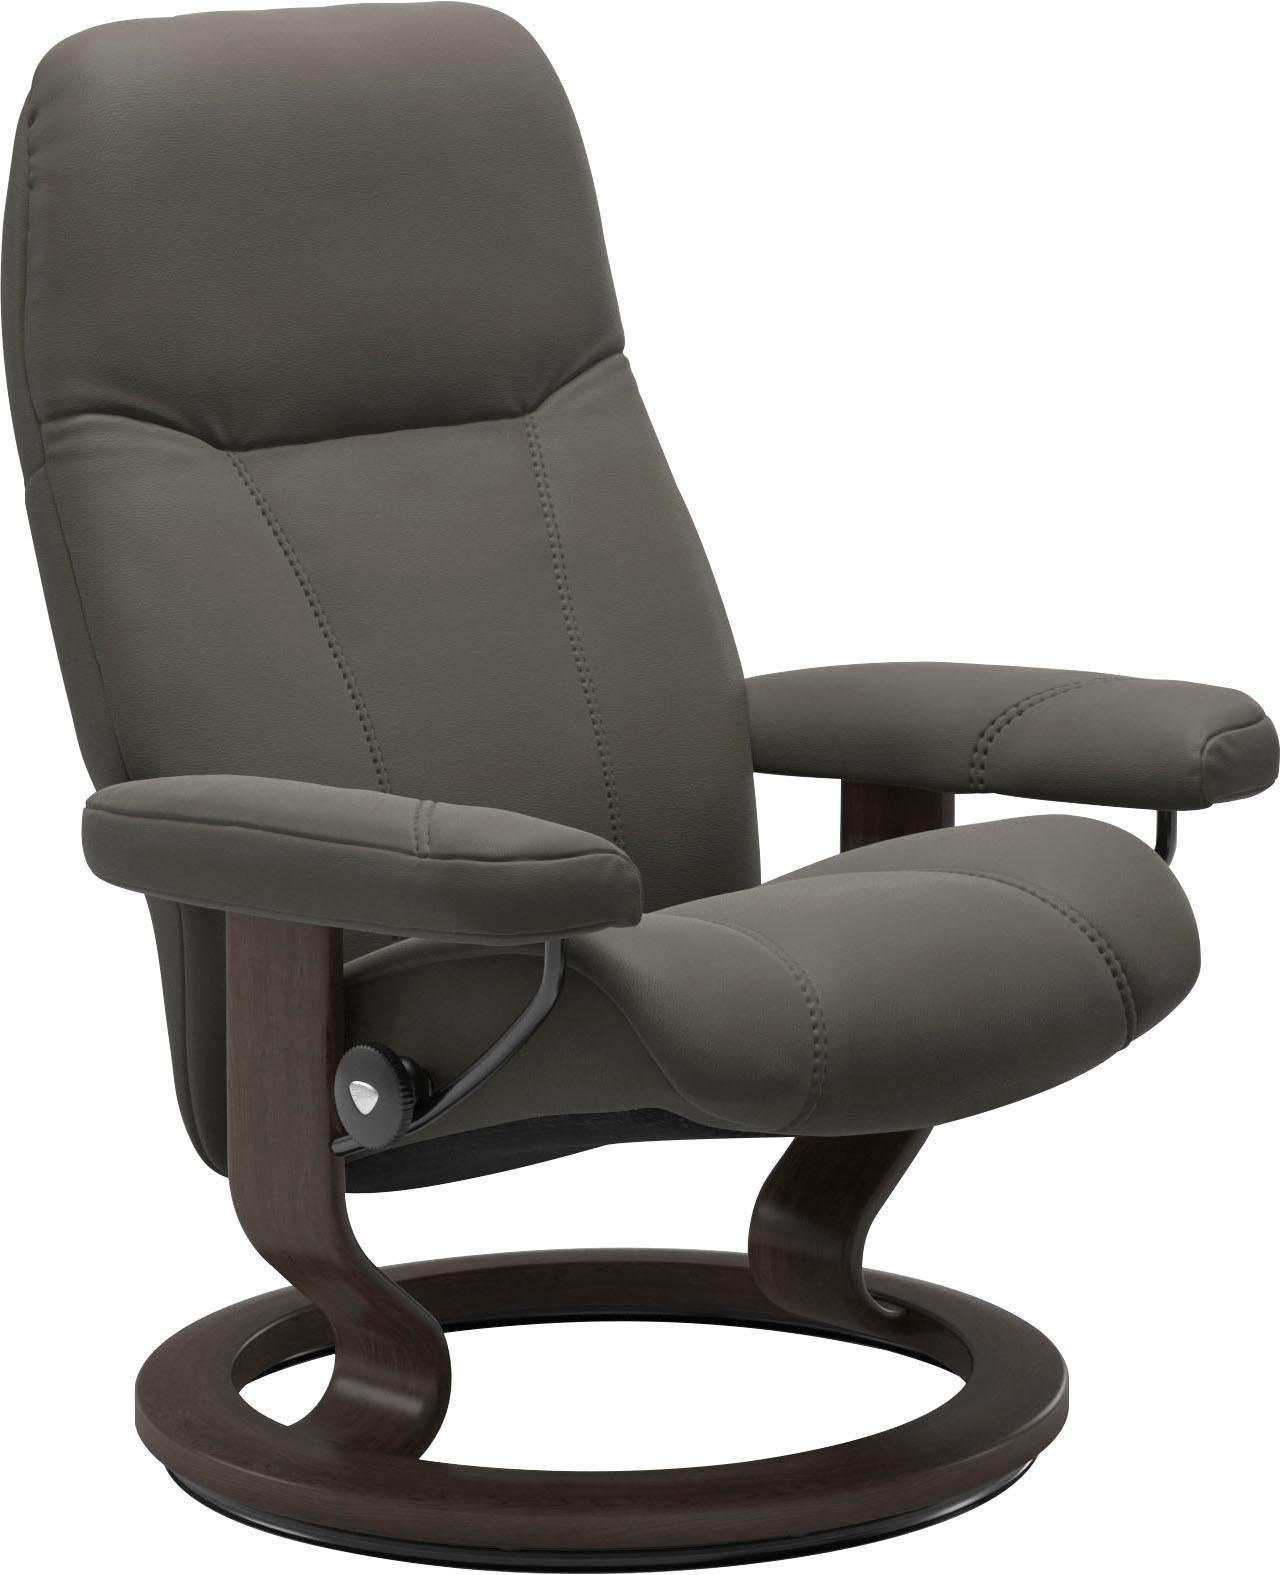 Stressless® Relaxsessel Consul, mit Classic S, Base, Gestell Wenge Größe